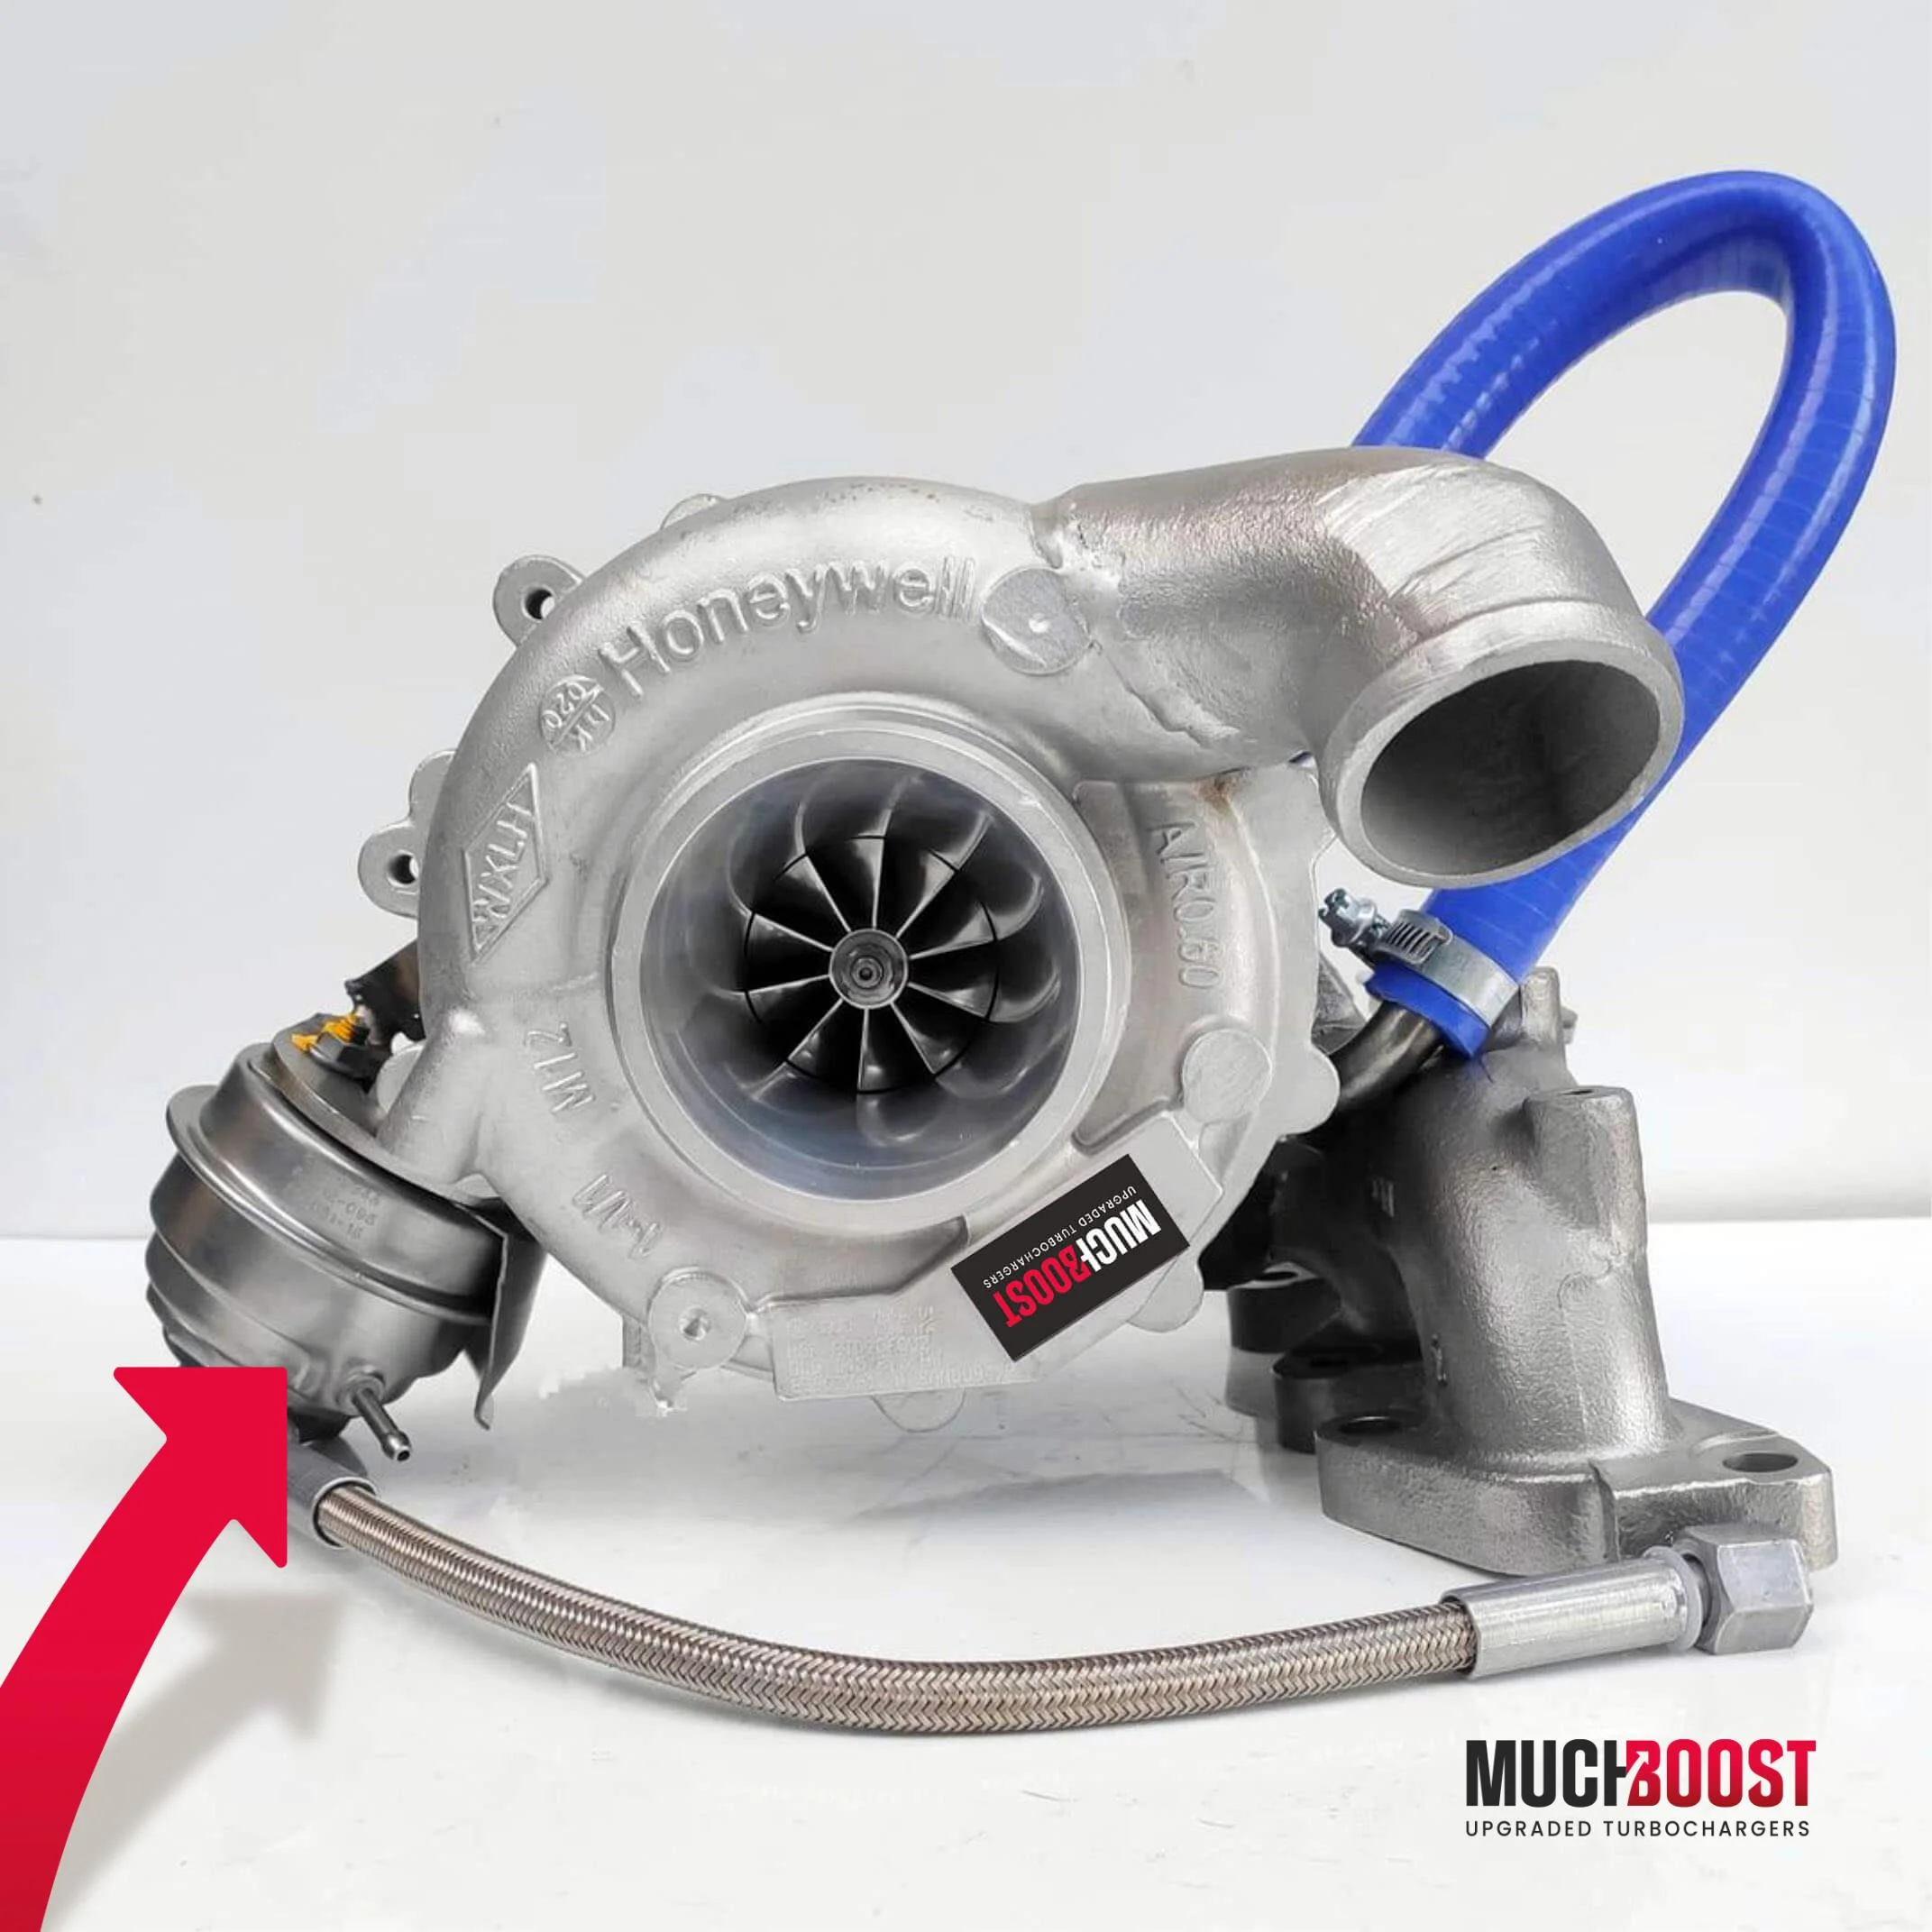 Is It Time for an Upgrade? Introducing the 6.0-Quart TurboBlaze